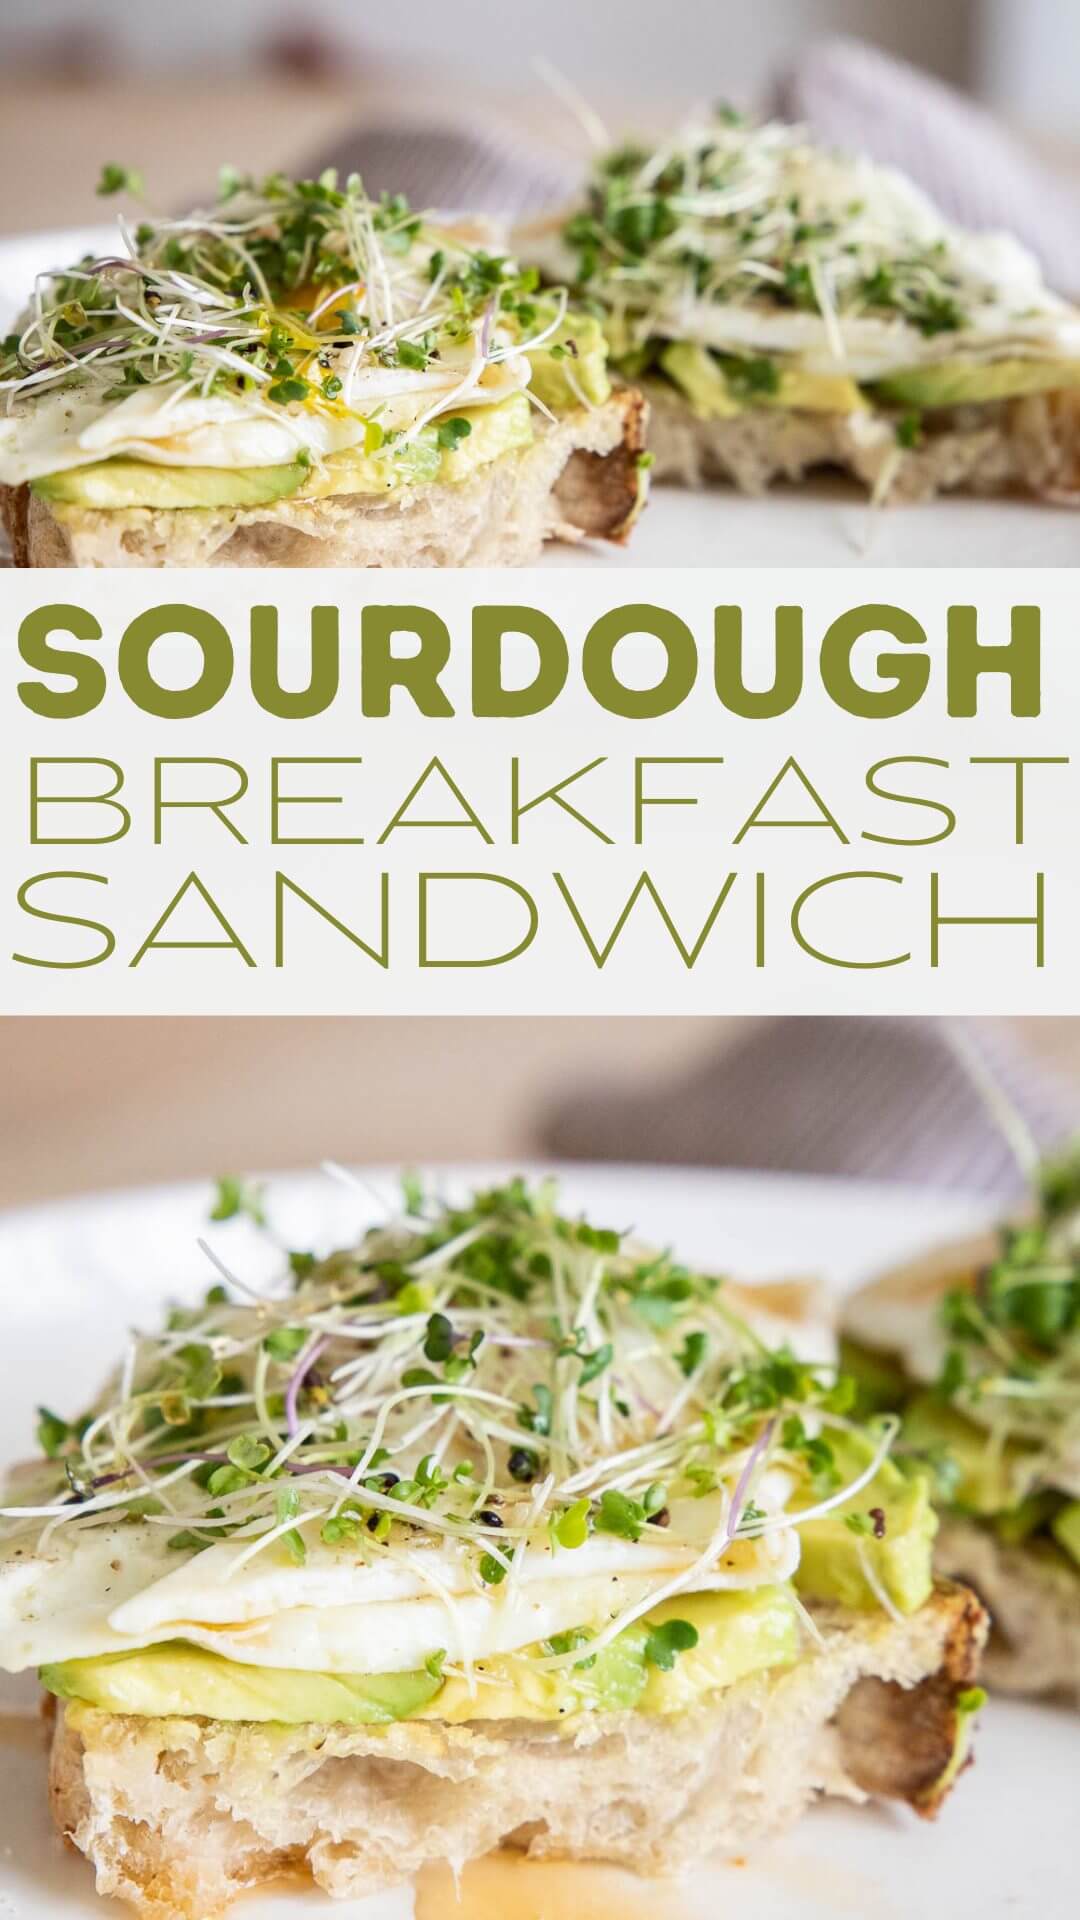 This hearty and healthy sourdough breakfast sandwich with eggs, avocado, microgreens, hot honey and sea salt is the perfect balanced breakfast. It is so full of flavor and is a perfectly balanced meal.